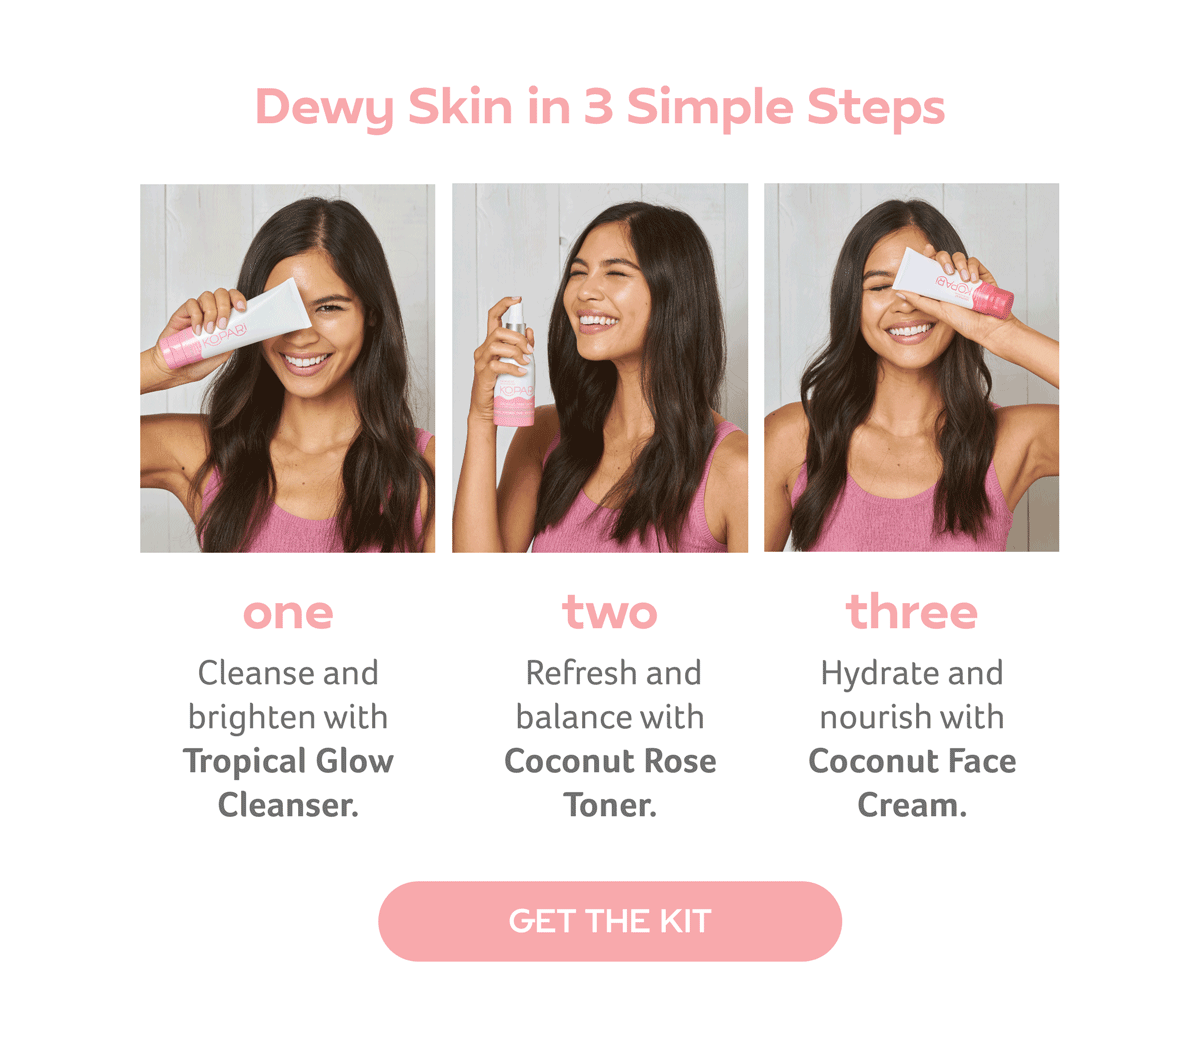 1. Cleanse & Brighten with Tropical Glow Cleanser.2. Refresh & Balance with Coconut Rose Toner.3. Hydrate & Nourish with Coconut Face Cream.